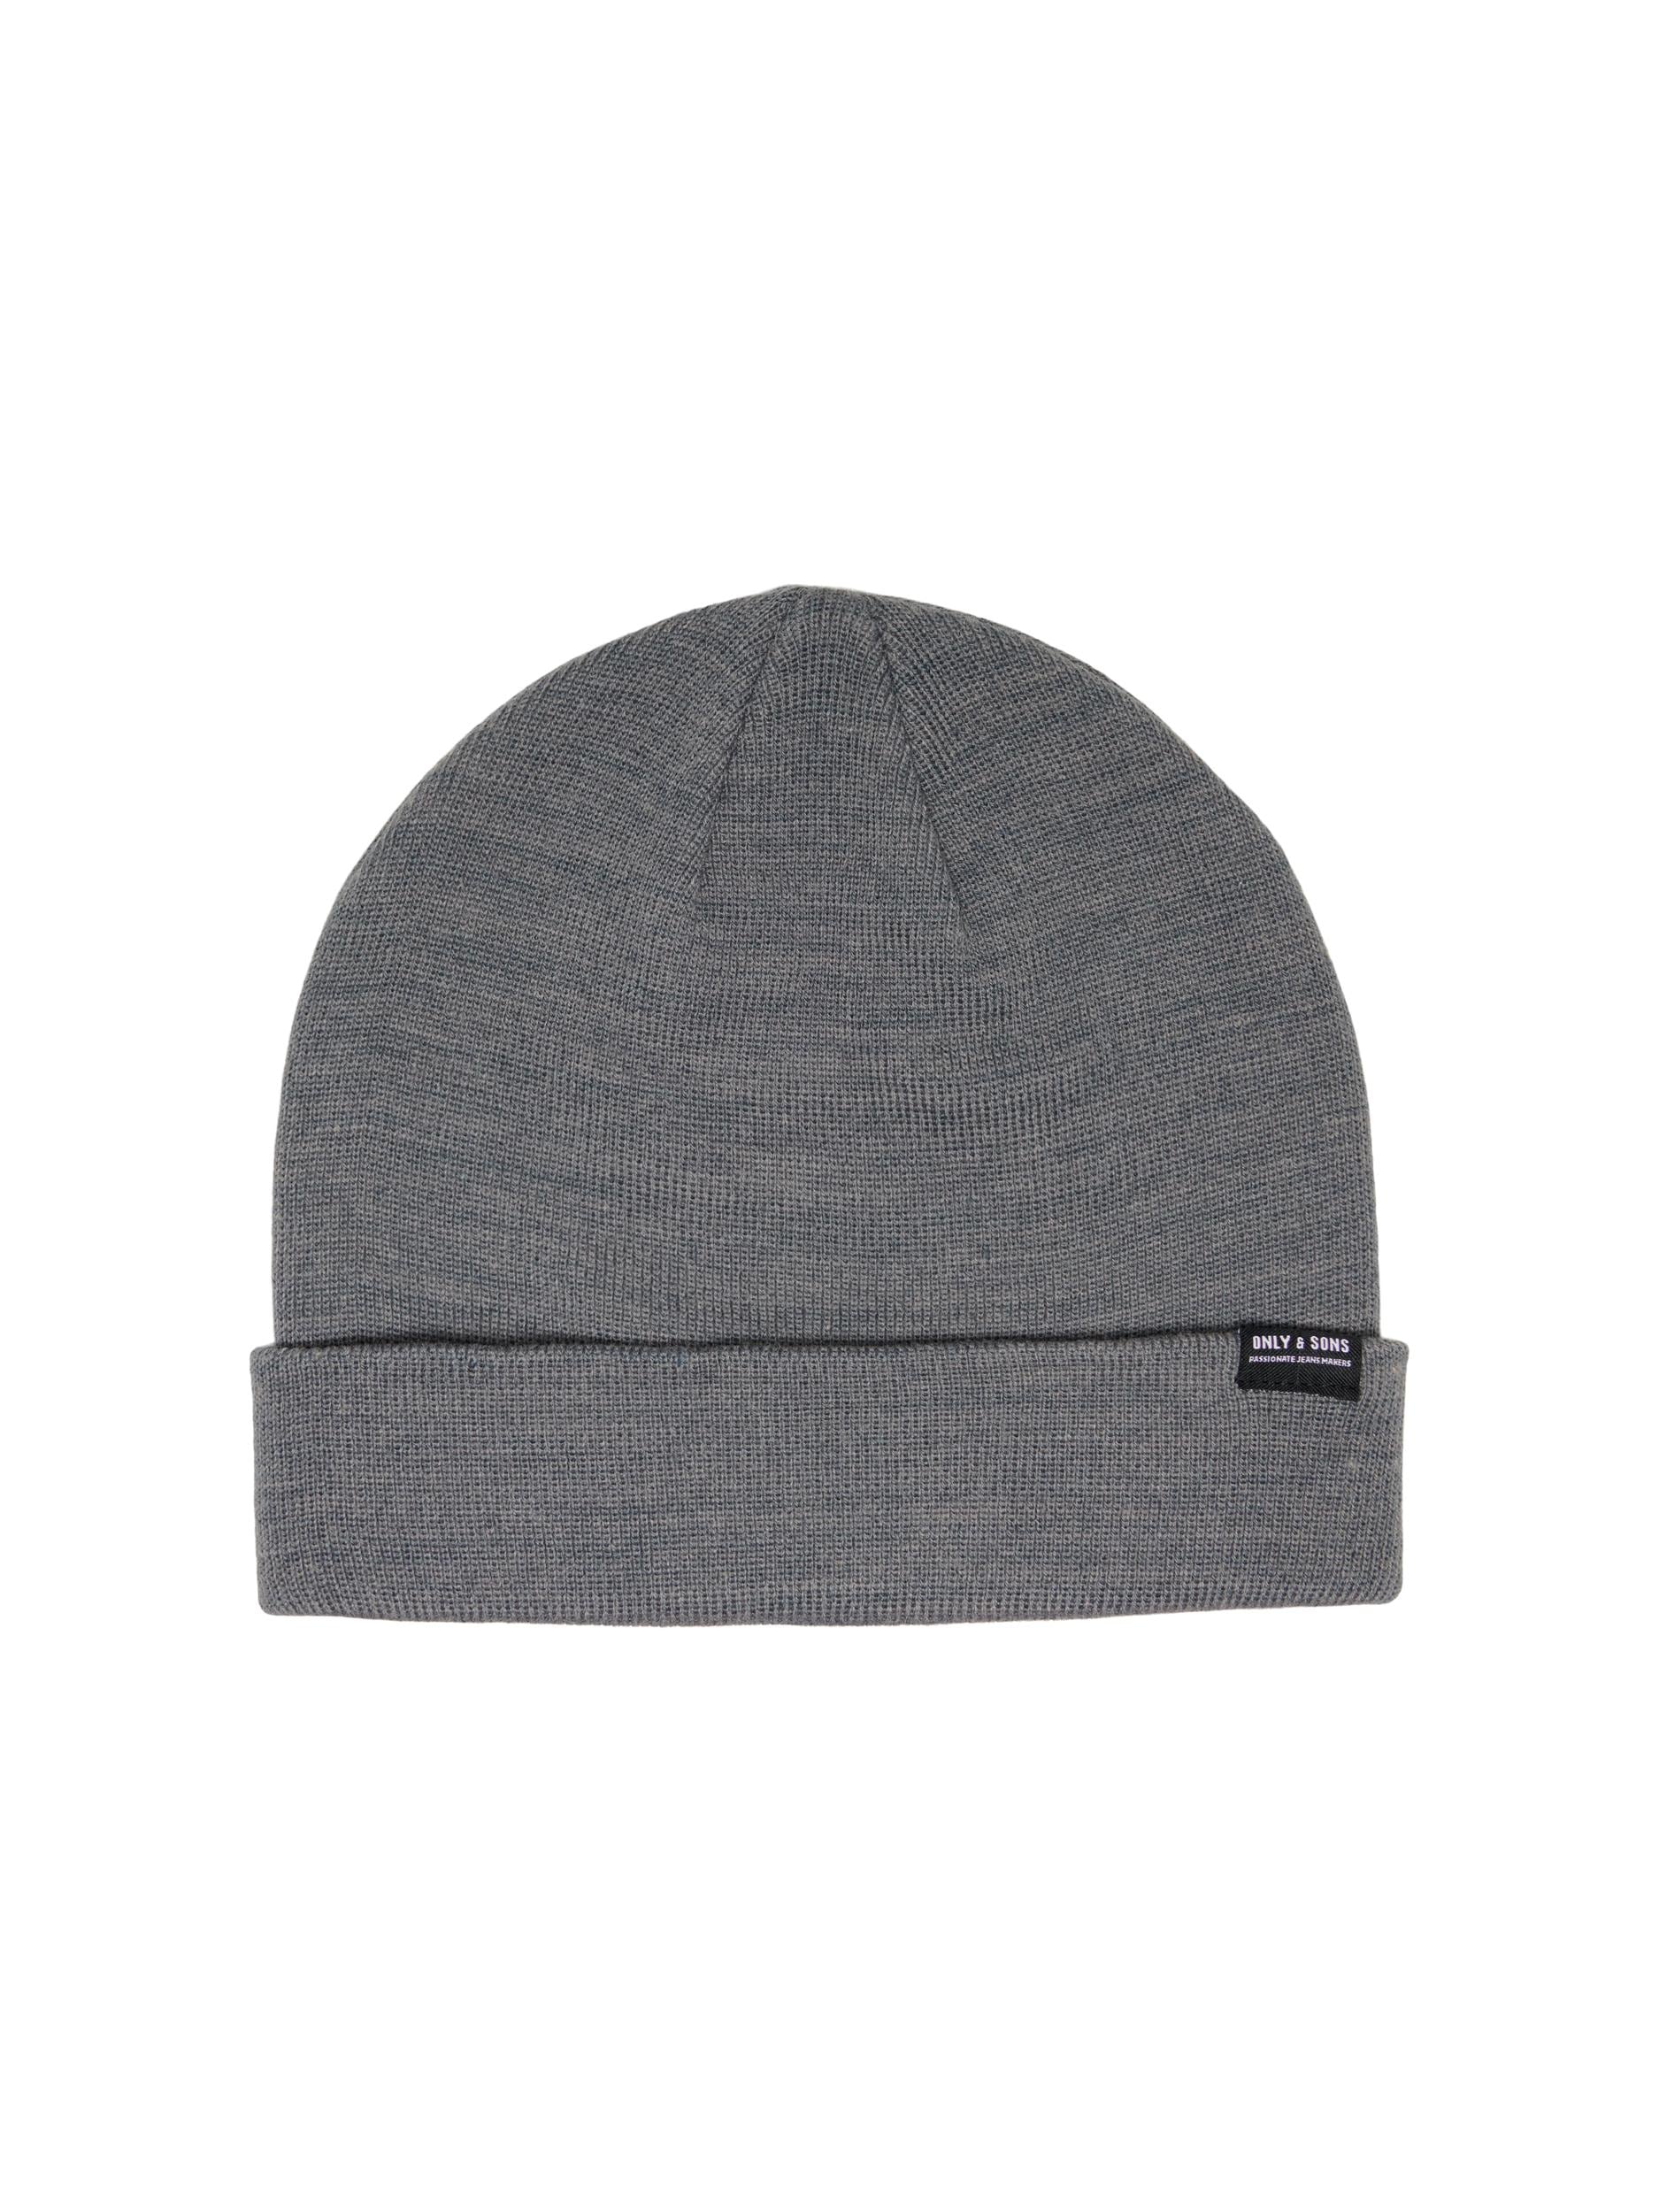 BEANIE »ONSEVAN Trouver SONS KNIT Beanie NOOS« & sur ONLY LIFE